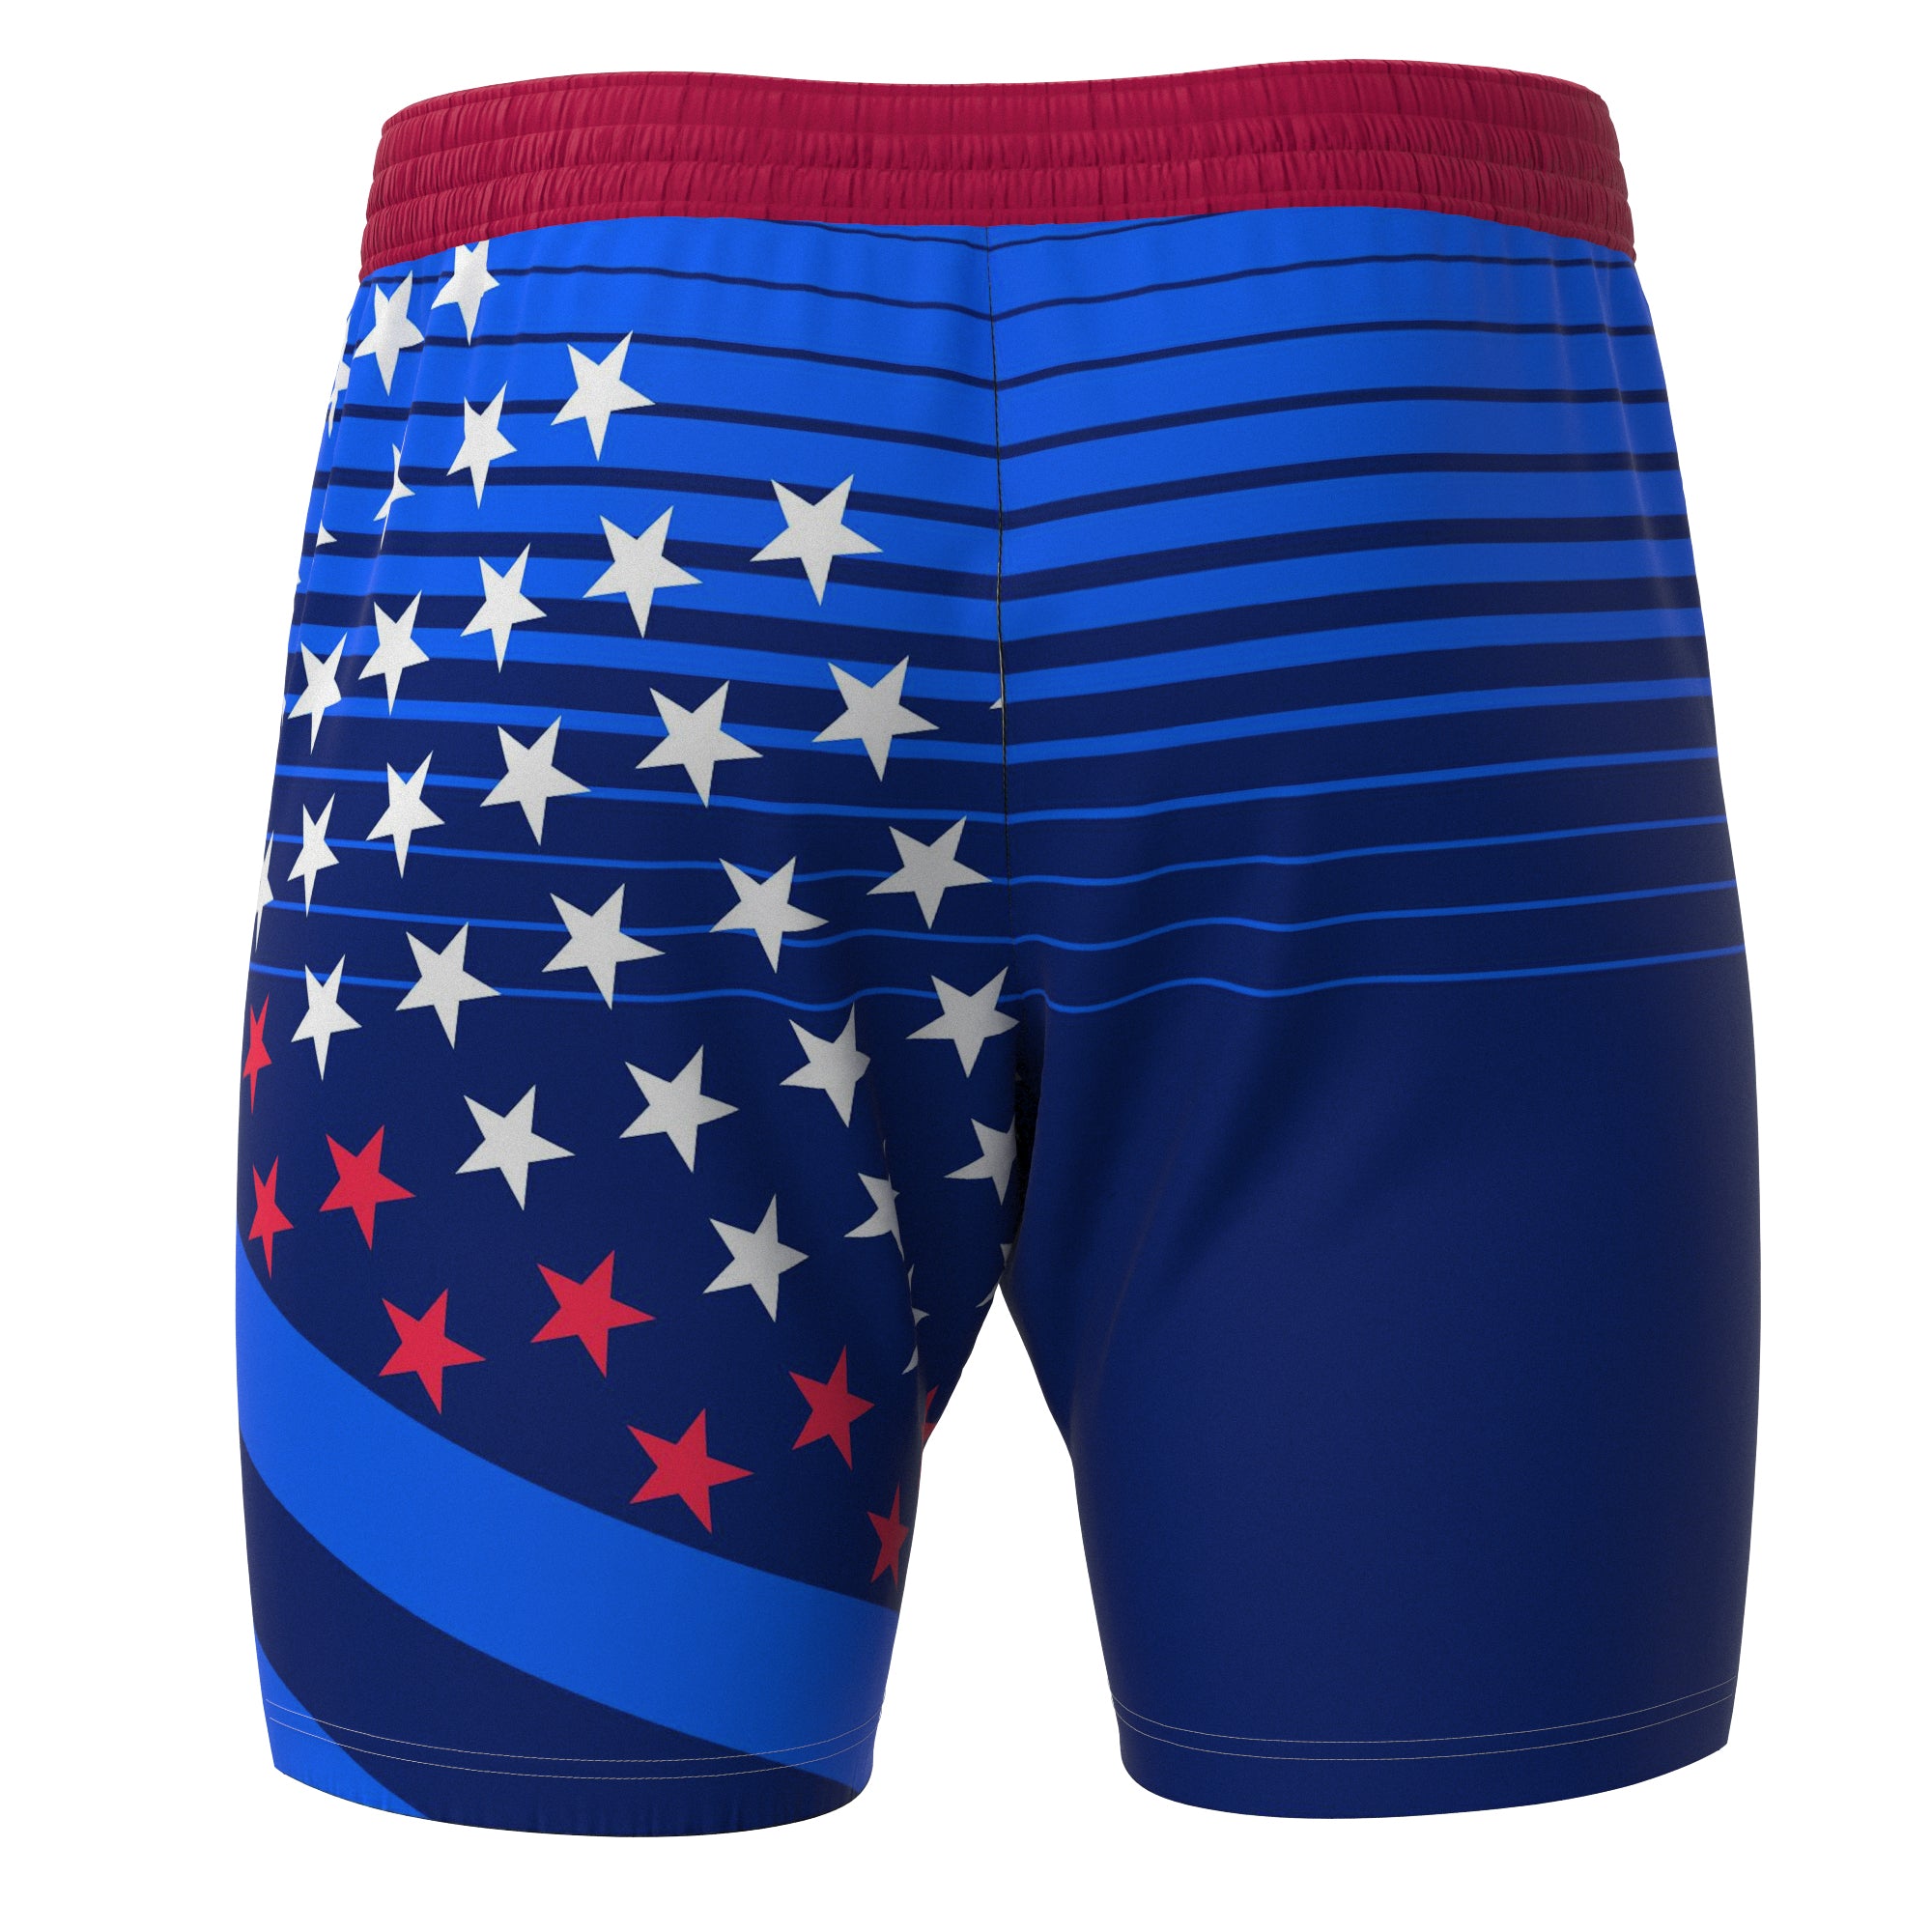 Olympic Championship Signature Sport Shorts in Blue